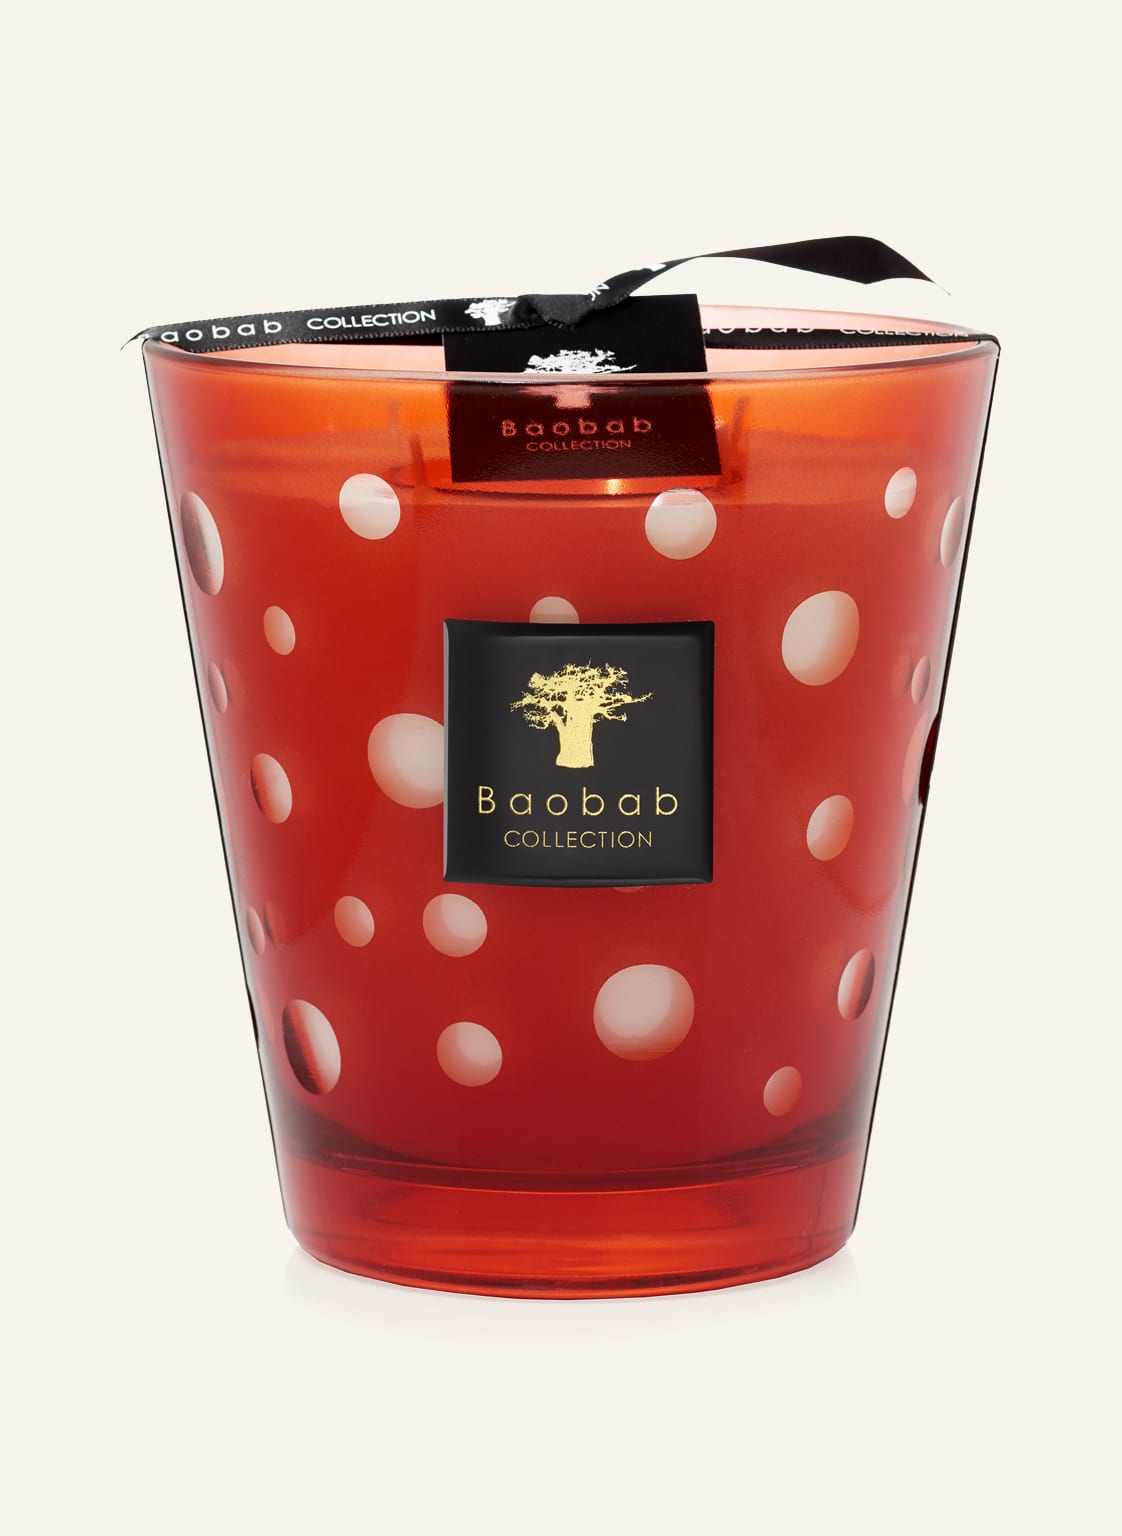 Baobab Collection Duftkerze Red Bubbles rot von Baobab COLLECTION